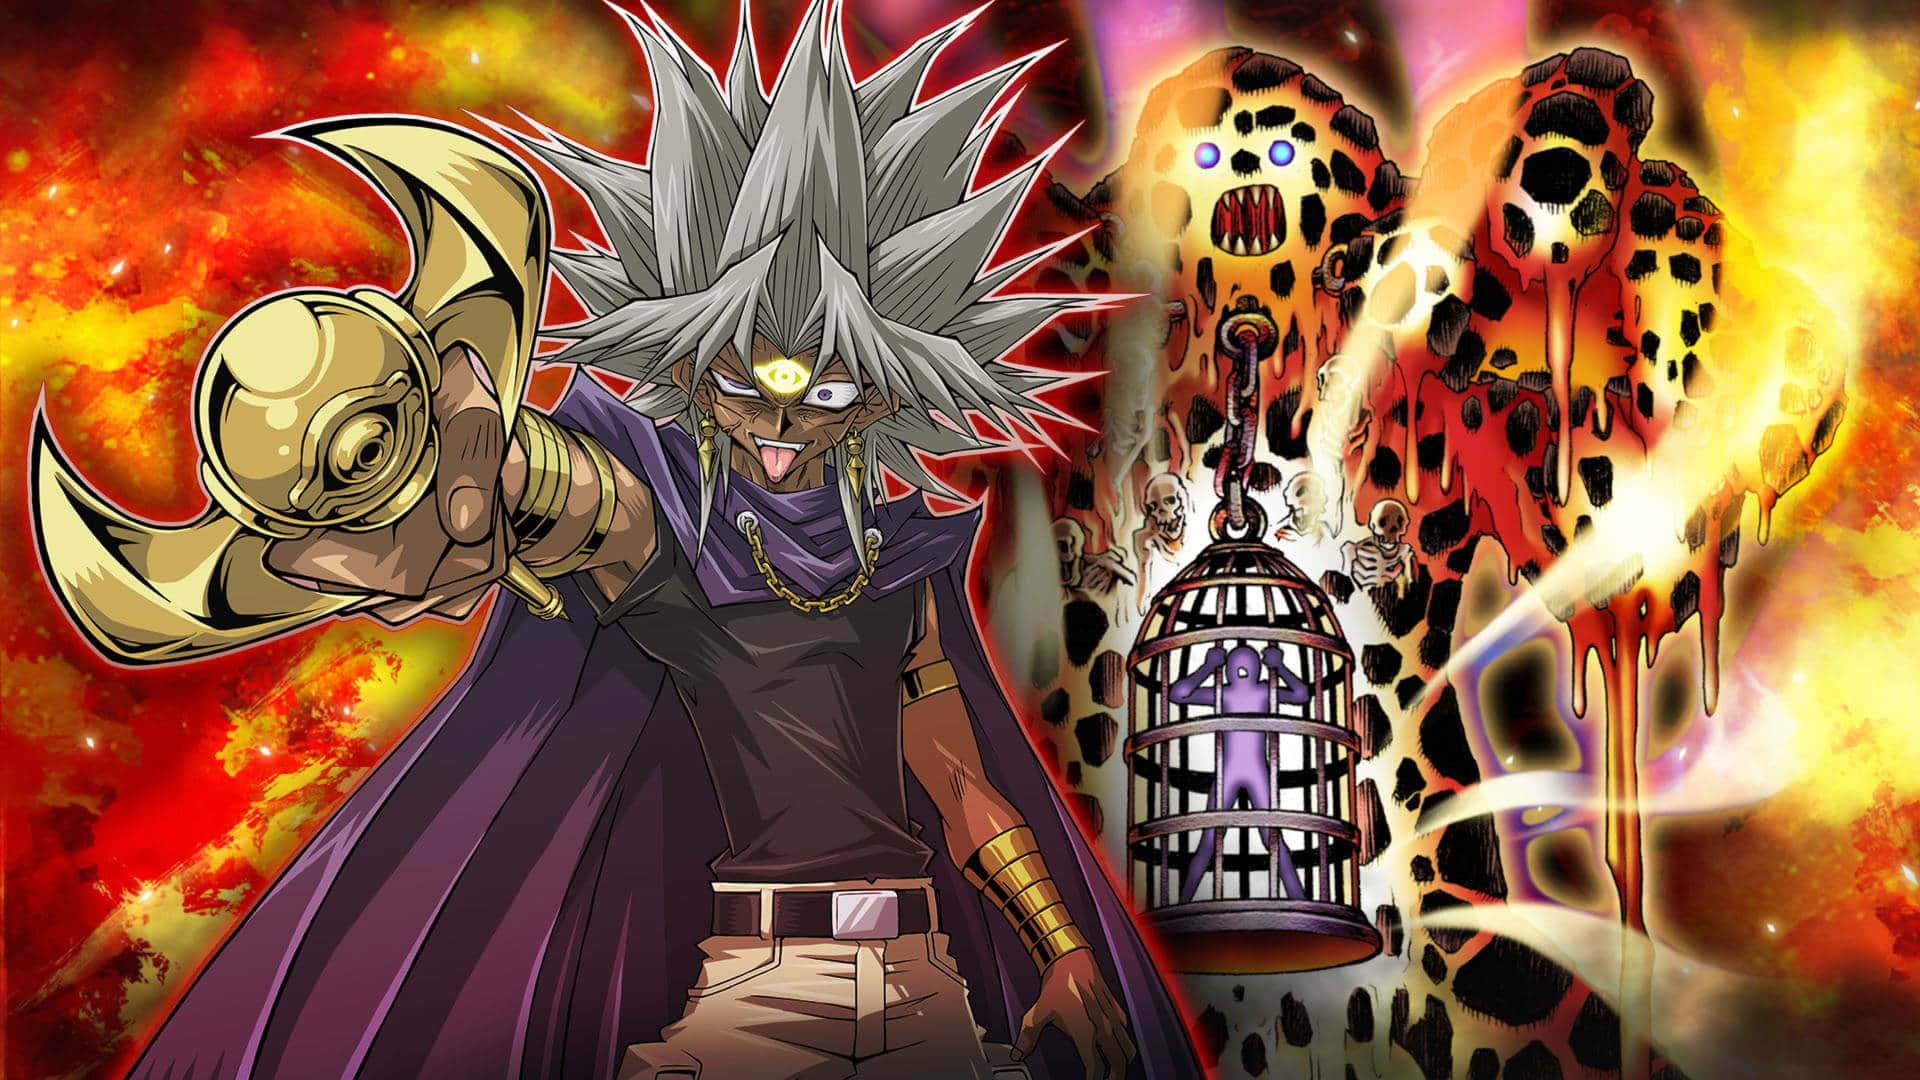 Marik Ishtar - The Cunning and Powerful Antagonist Wallpaper